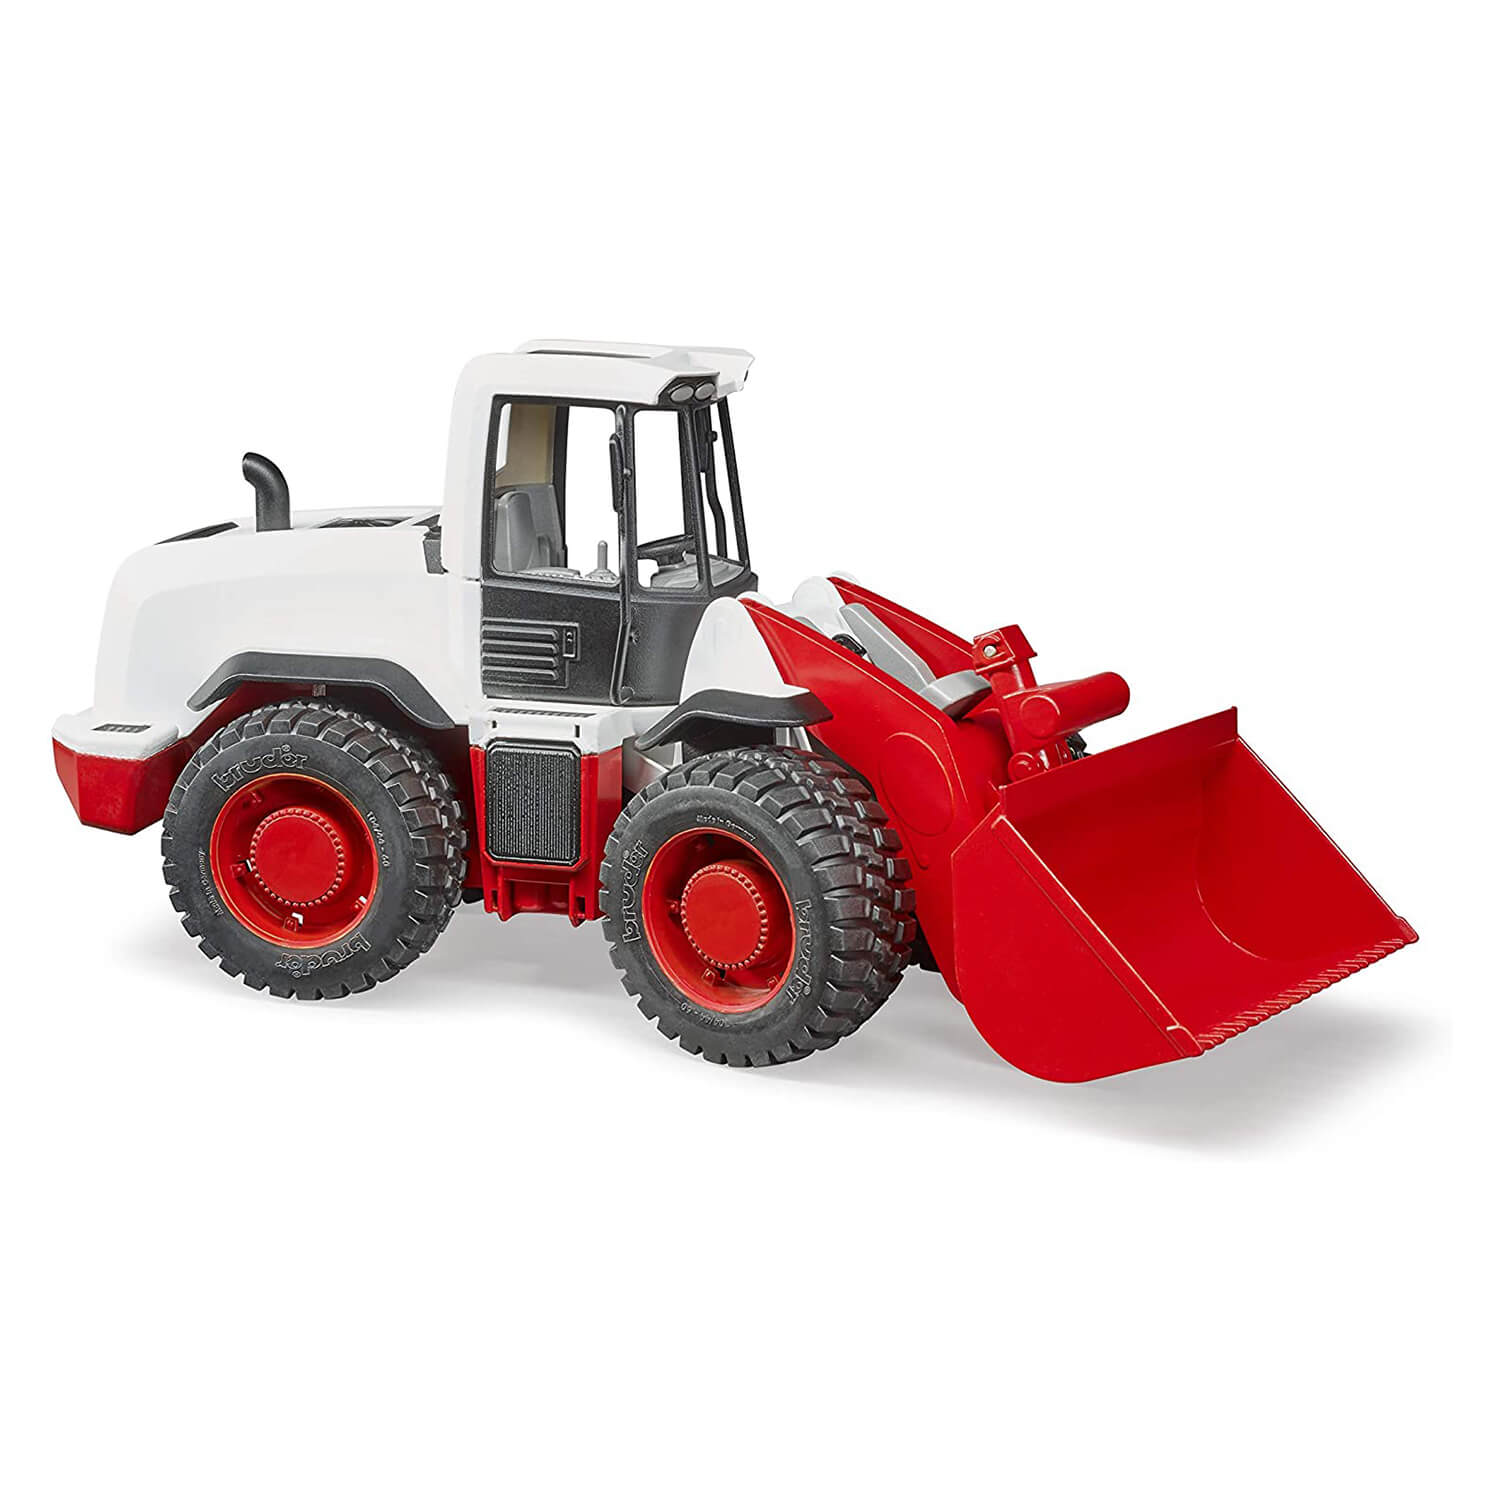 Side view of the Bruder Pro Series Front-End Wheel Loader 1:16 Scale Vehicle.